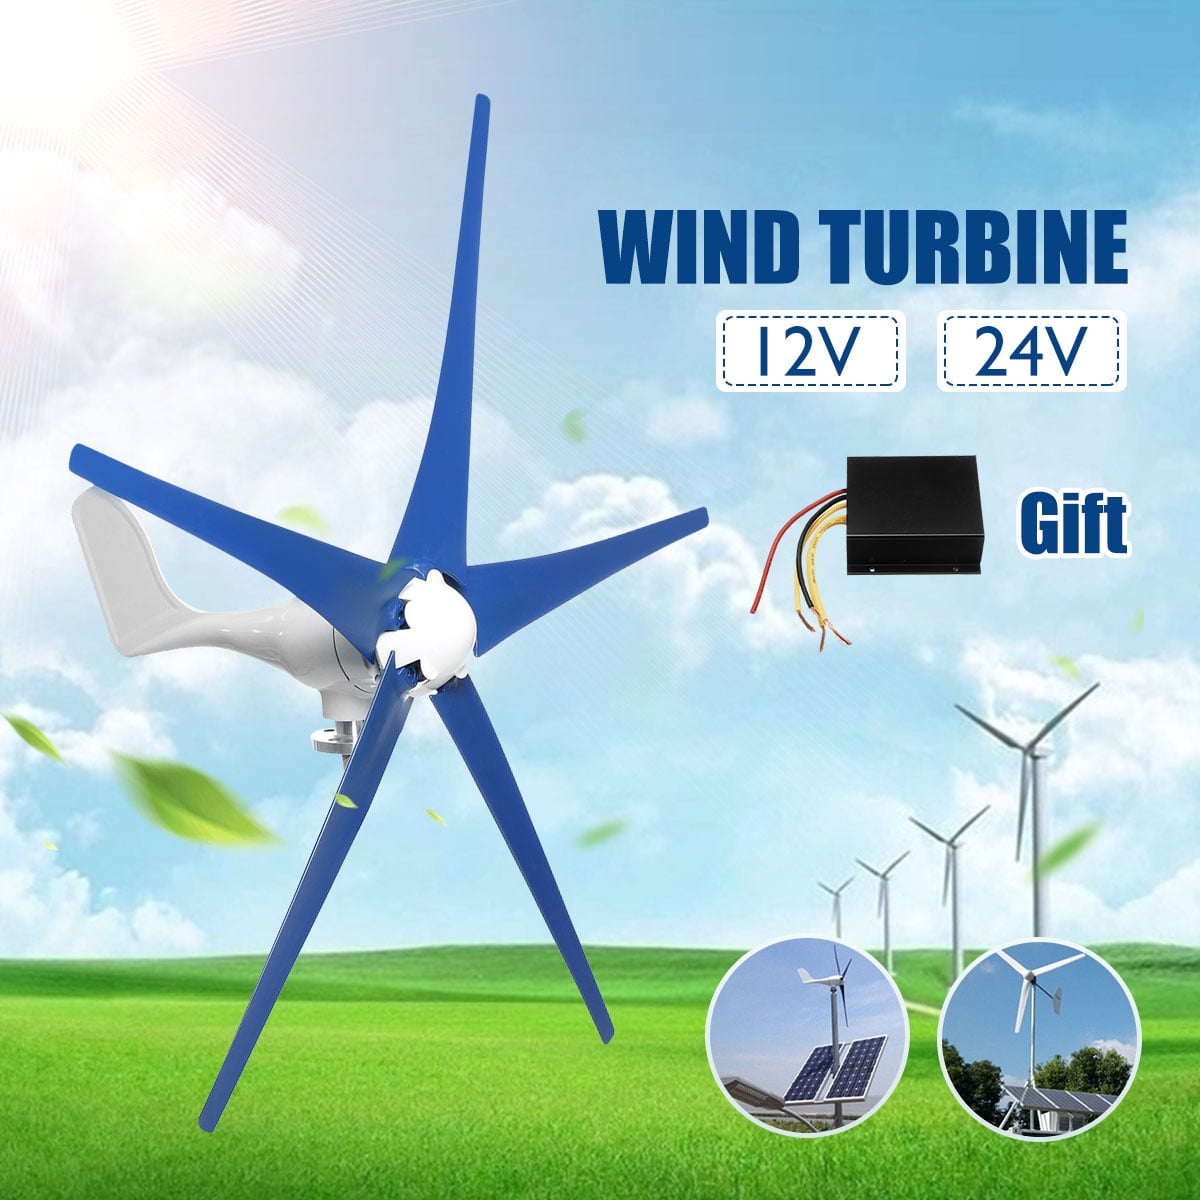 Details about   5 Blades 800W Max Power 12V/24V Wind Turbine Generator Kit W/ Charge Controller 